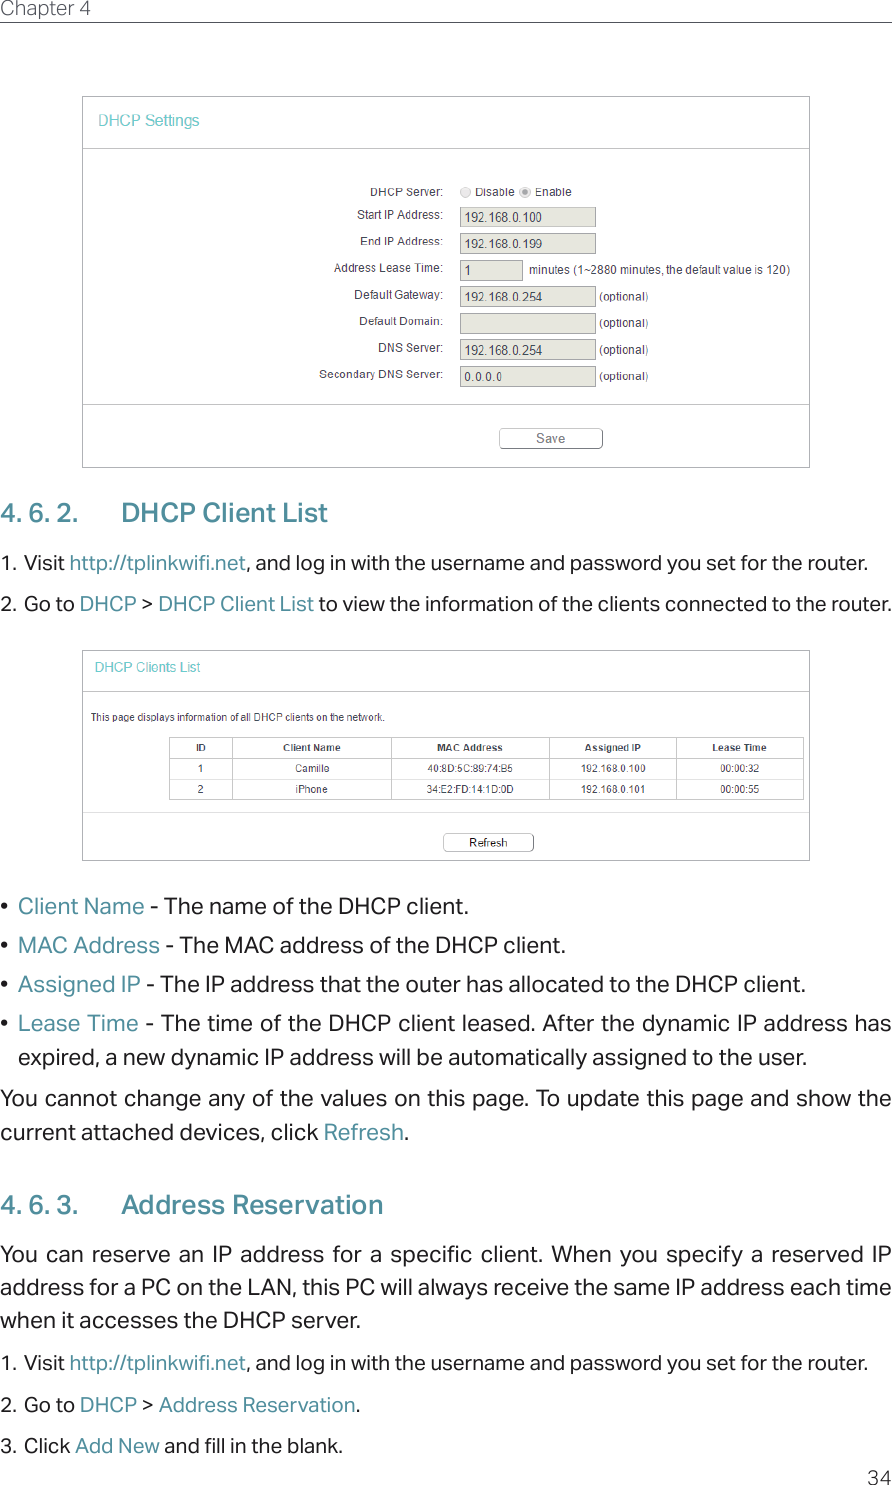 34Chapter 4  4. 6. 2.  DHCP Client List1. Visit http://tplinkwifi.net, and log in with the username and password you set for the router.2. Go to DHCP &gt; DHCP Client List to view the information of the clients connected to the router.•  Client Name - The name of the DHCP client.•  MAC Address - The MAC address of the DHCP client. •  Assigned IP - The IP address that the outer has allocated to the DHCP client.•  Lease Time - The time of the DHCP client leased. After the dynamic IP address has expired, a new dynamic IP address will be automatically assigned to the user.  You cannot change any of the values on this page. To update this page and show the current attached devices, click Refresh.4. 6. 3.  Address ReservationYou can reserve an IP address for a specific client. When you specify a reserved IP address for a PC on the LAN, this PC will always receive the same IP address each time when it accesses the DHCP server.1. Visit http://tplinkwifi.net, and log in with the username and password you set for the router.2. Go to DHCP &gt; Address Reservation.3. Click Add New and fill in the blank.